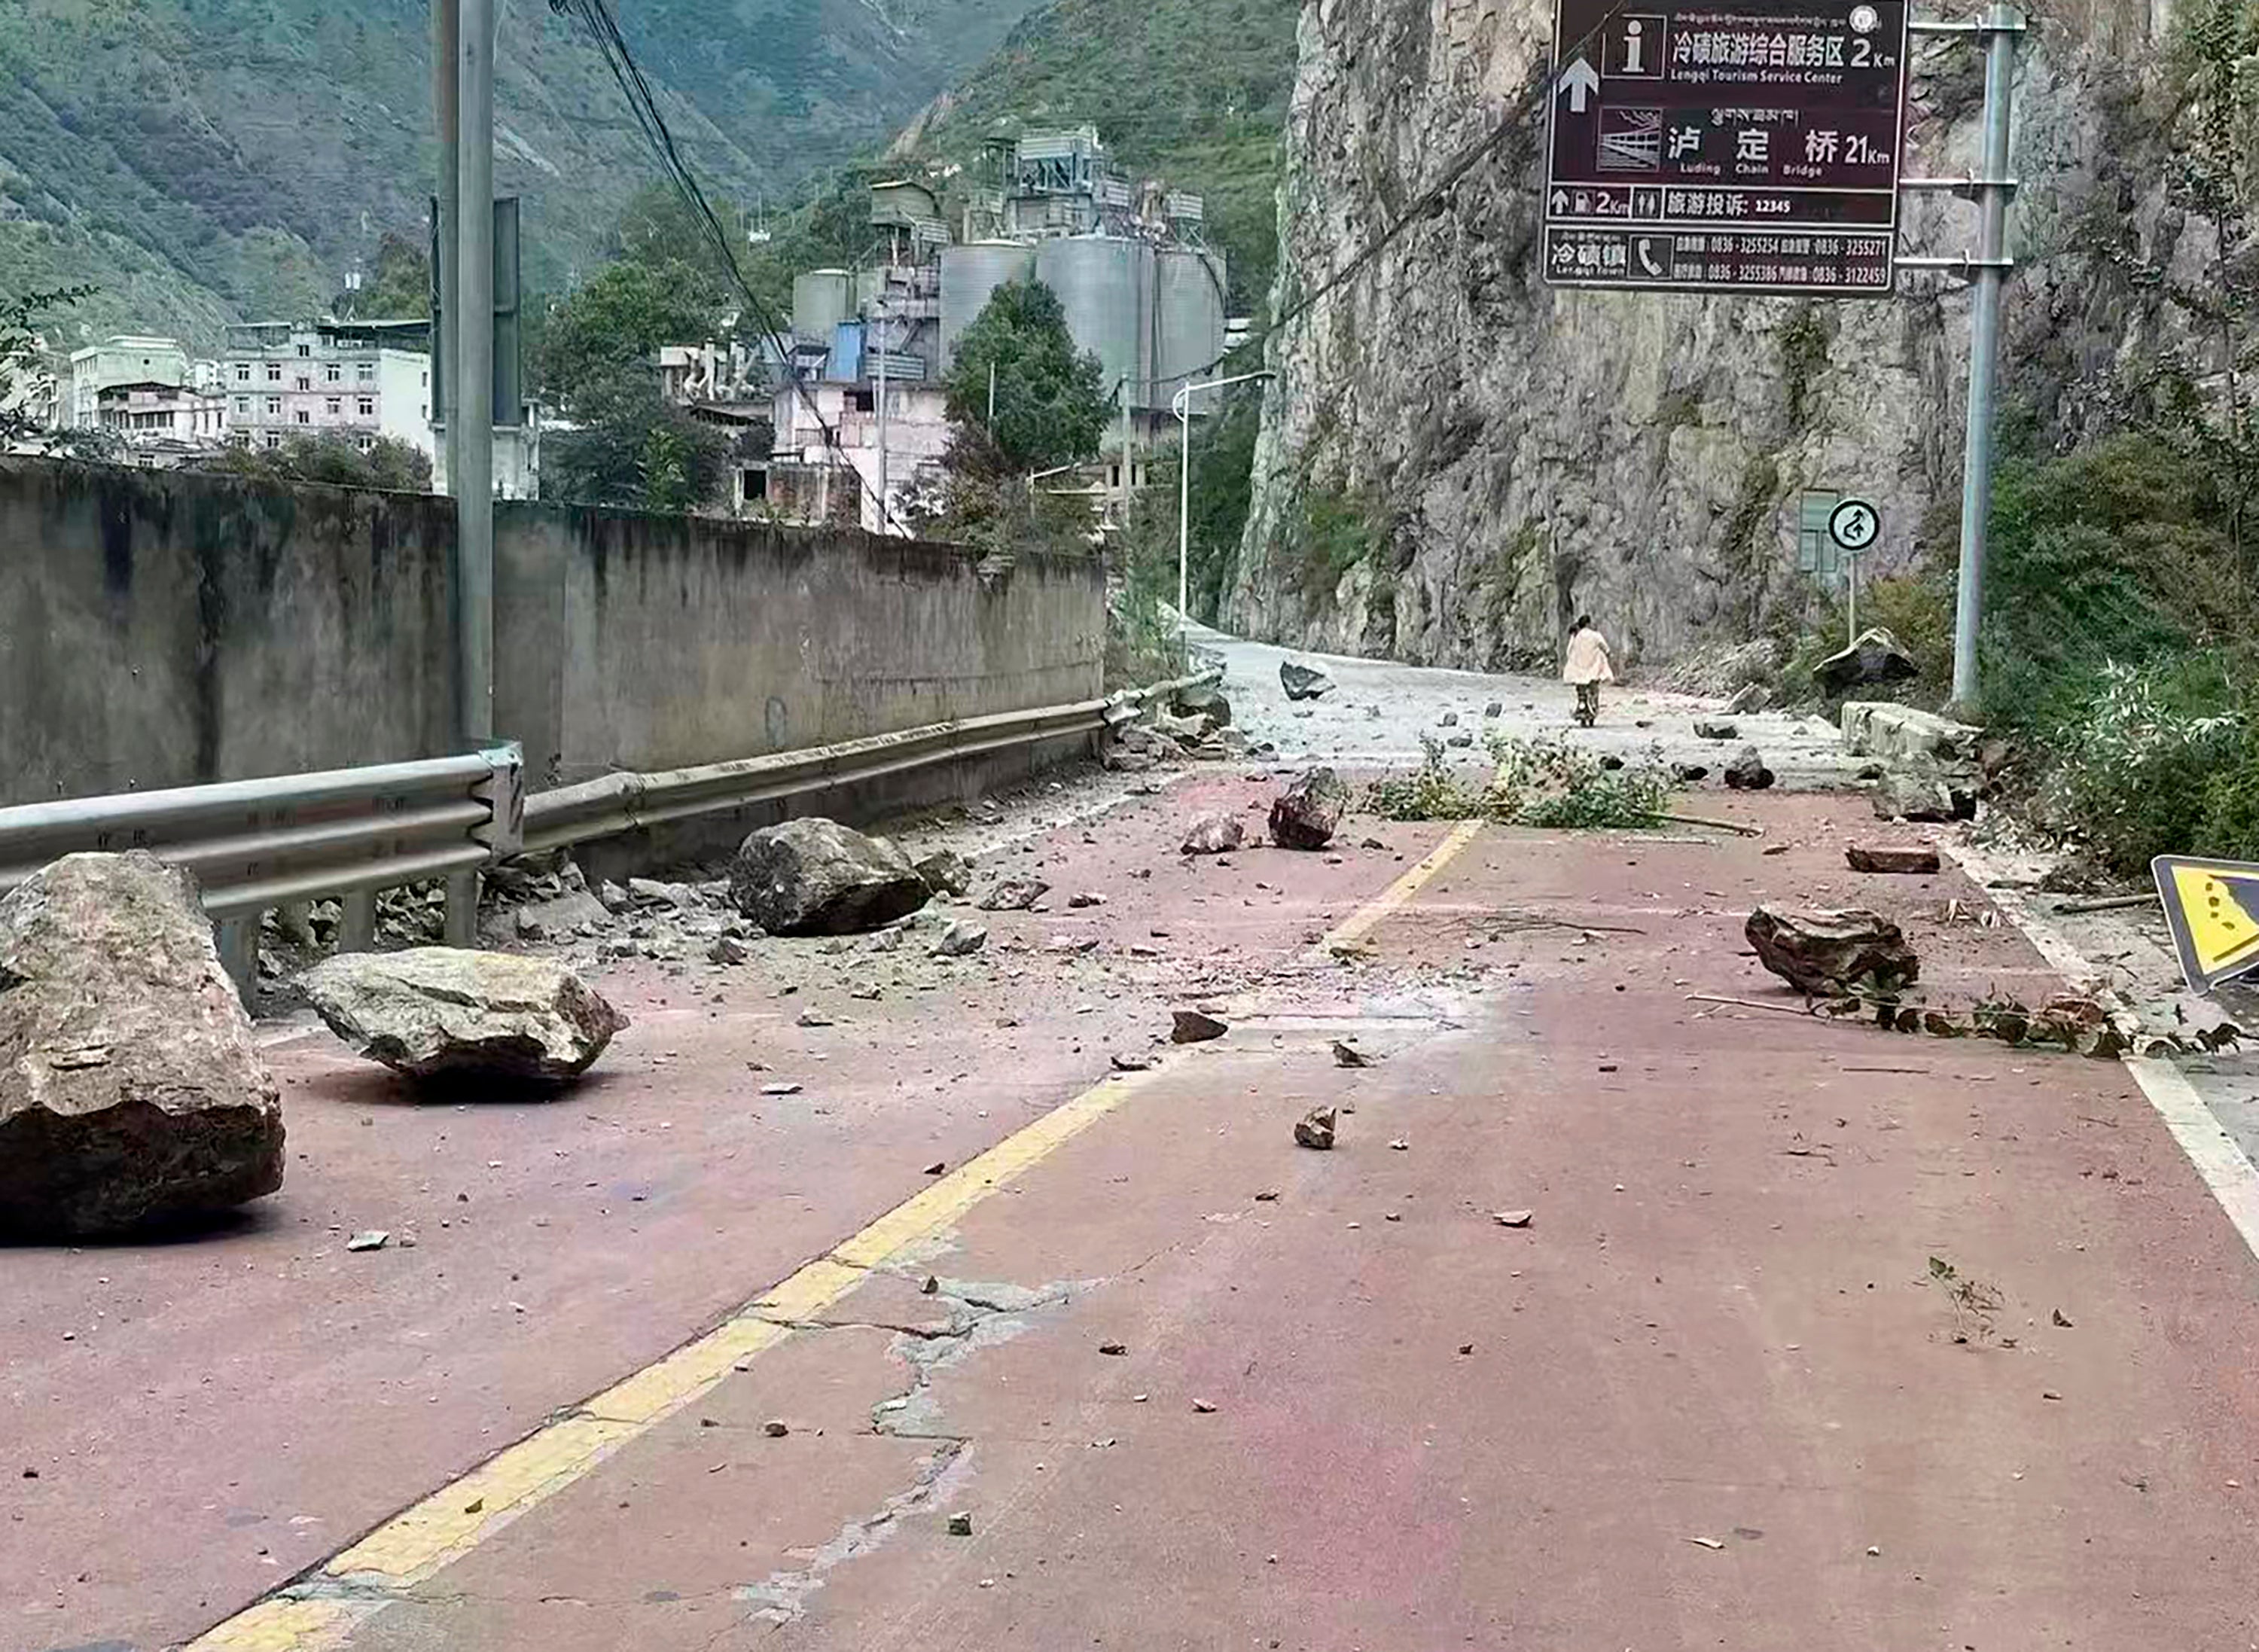 Fallen rocks are seen on a road near Lengqi Town in Luding County, Sichuan after a strong earthquake on 5 September